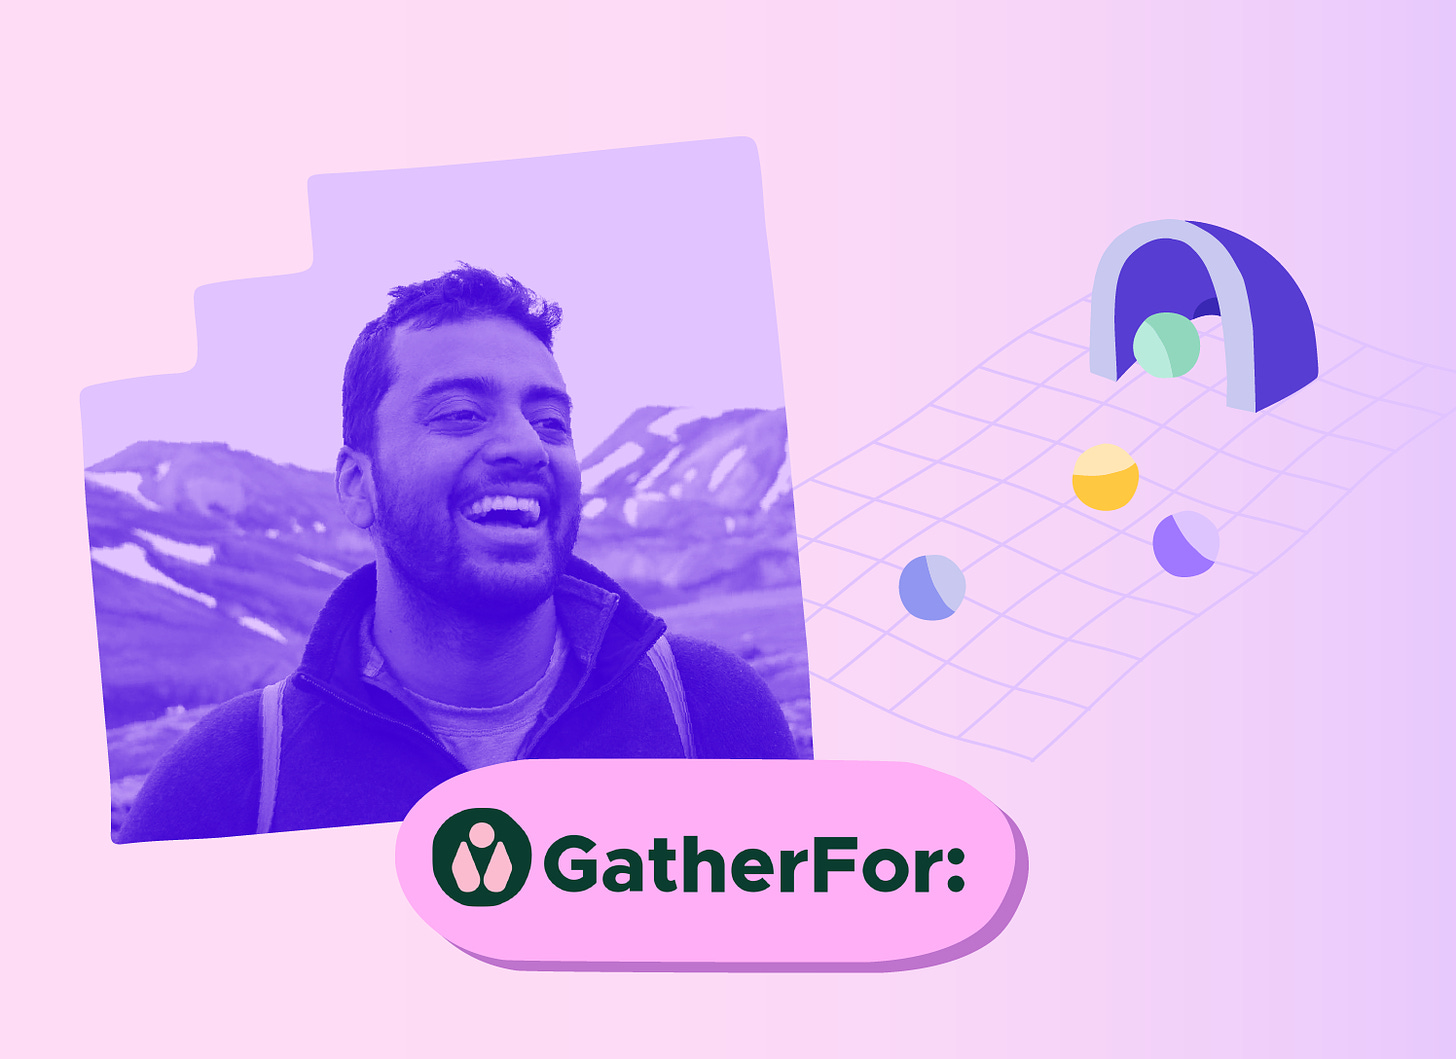 A colorful photo illustration with little balls and a shape that looks like a net. With a logo for GatherFor: and a photo of Teju, an Indian man who appears to be in his 30s.